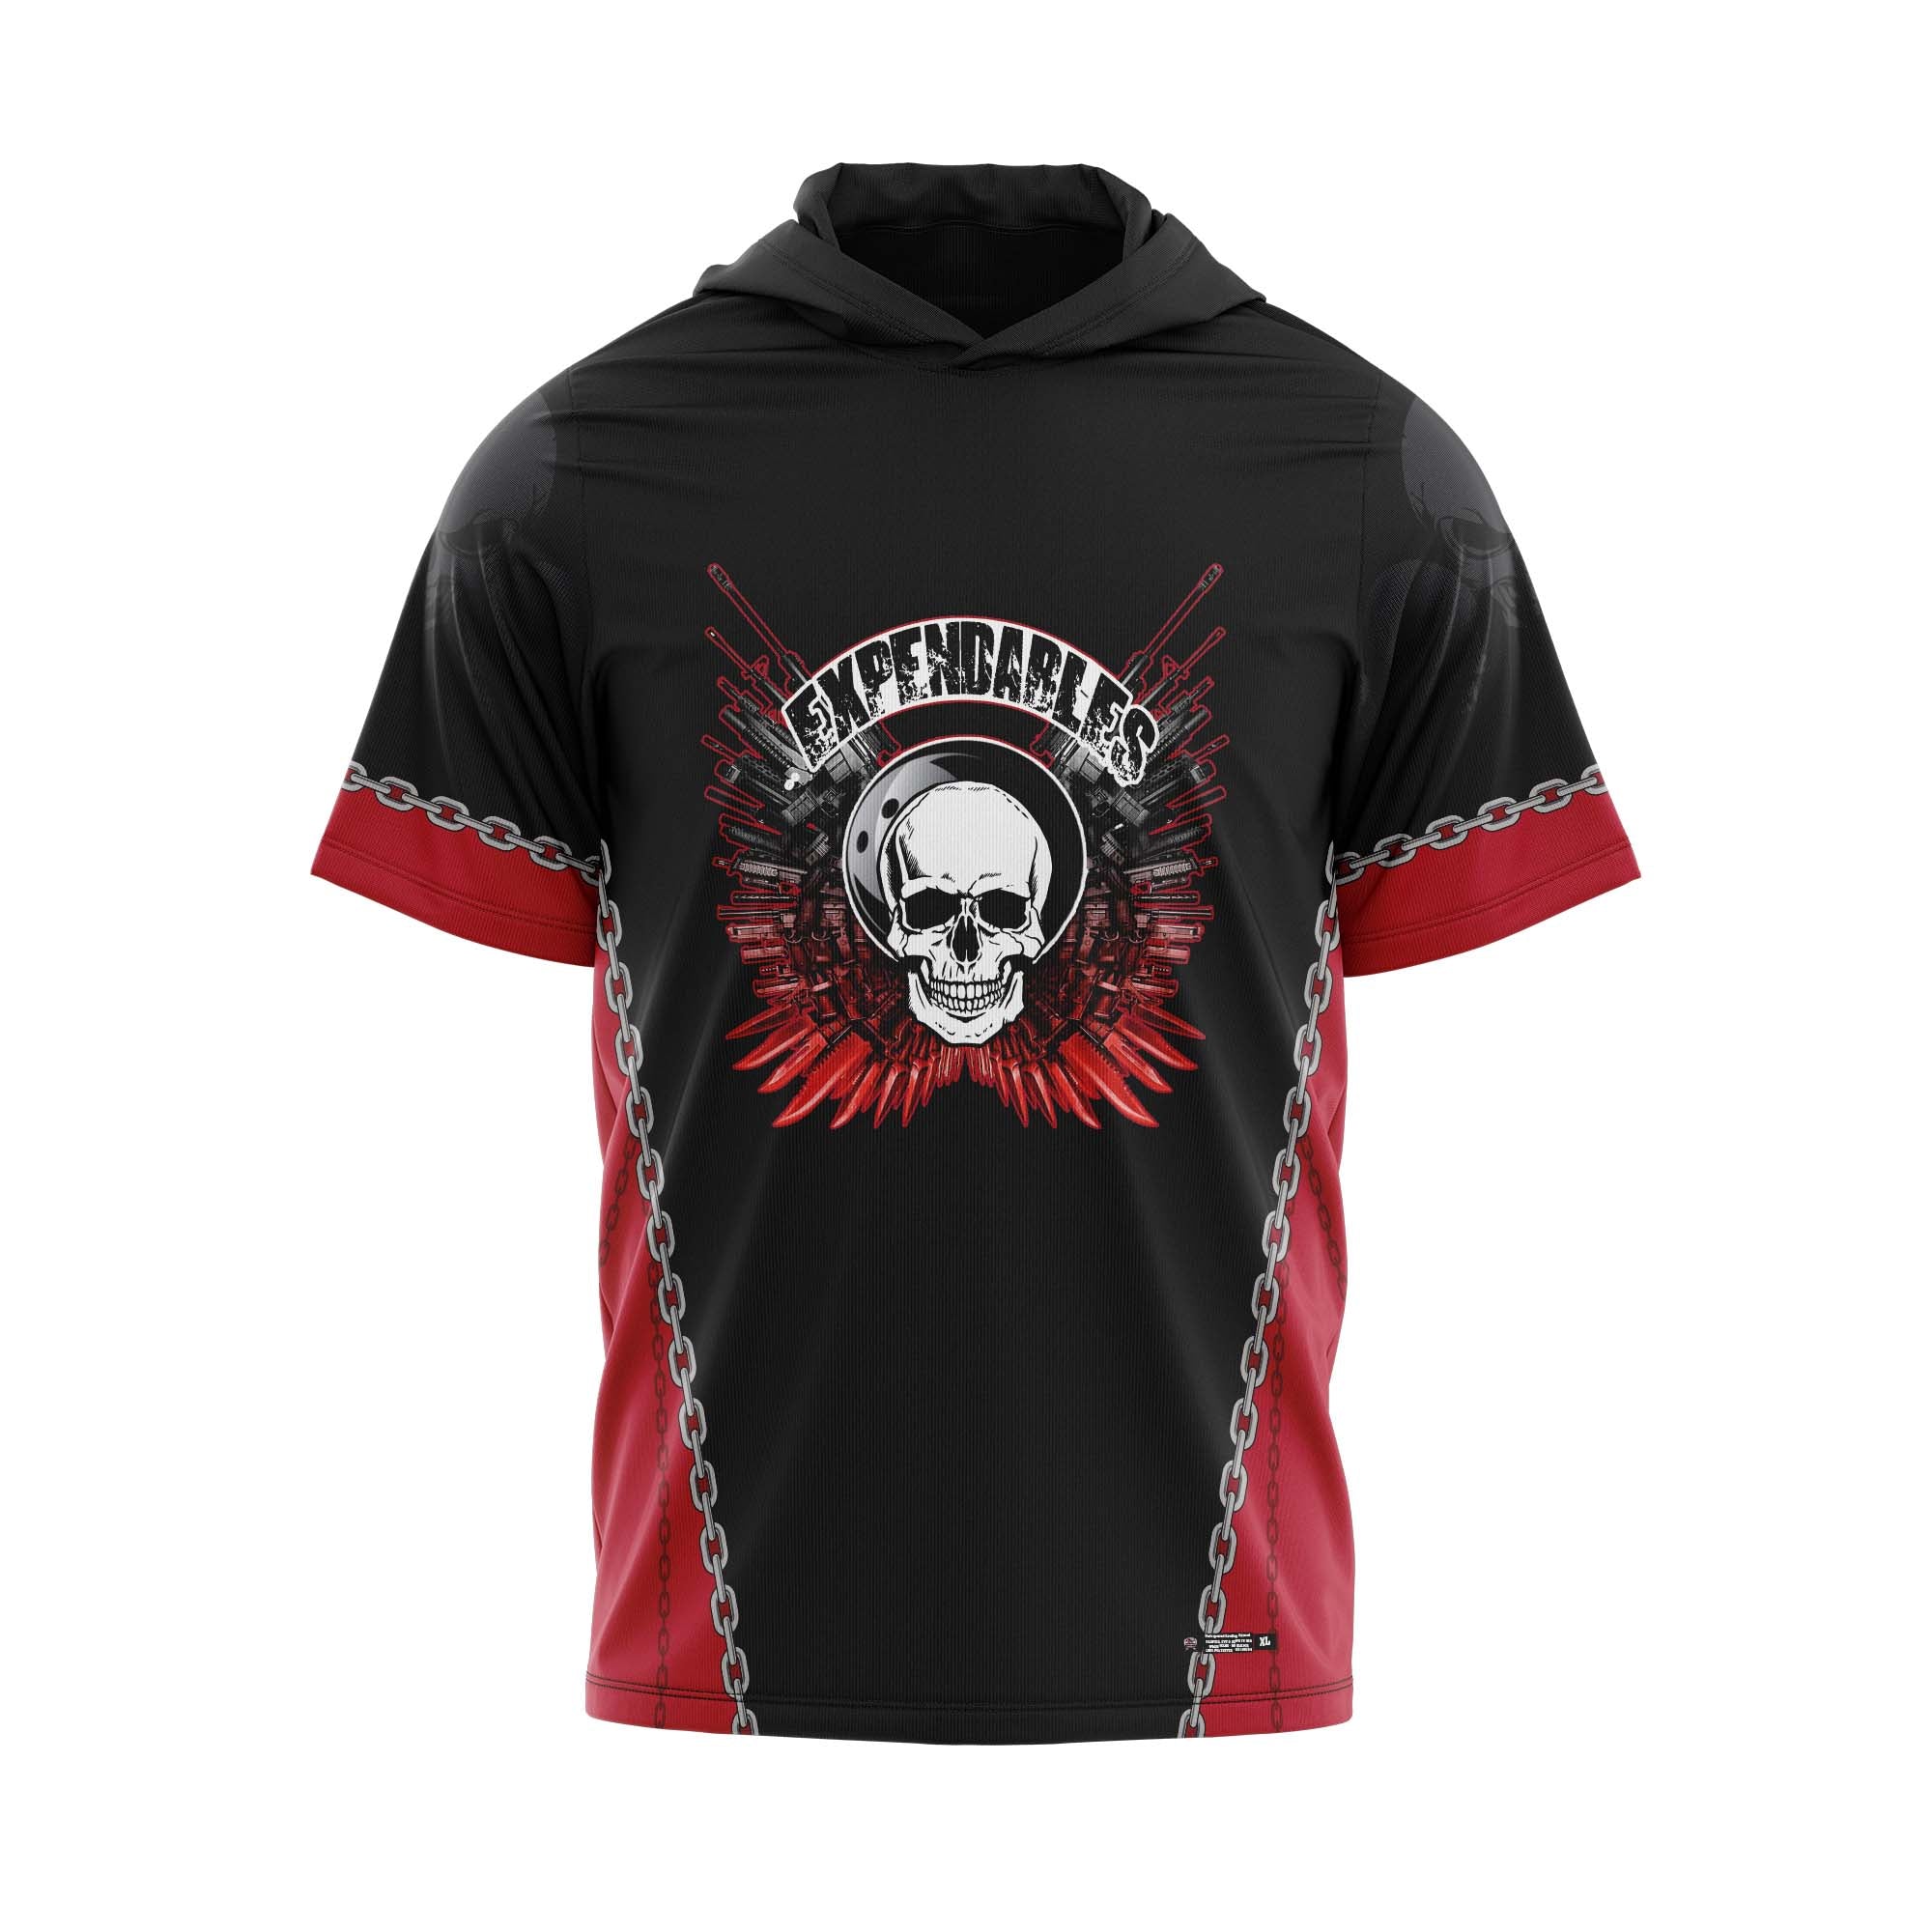 The Expendables Red & Black Jersey